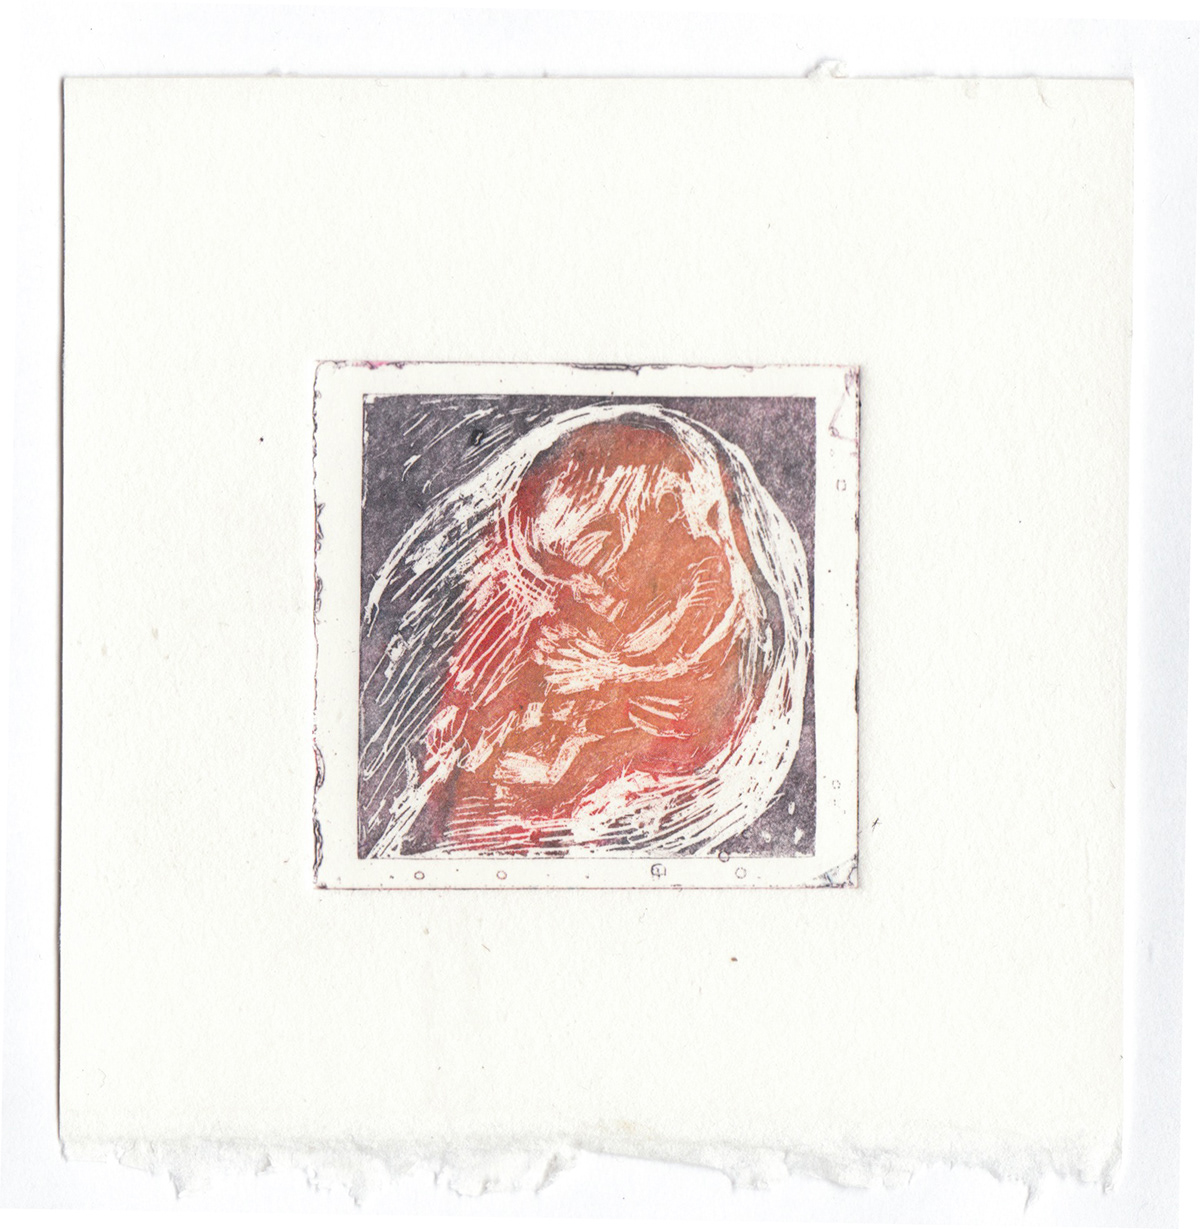 Fragile  embryo  unborn  baby  pregnant  etching